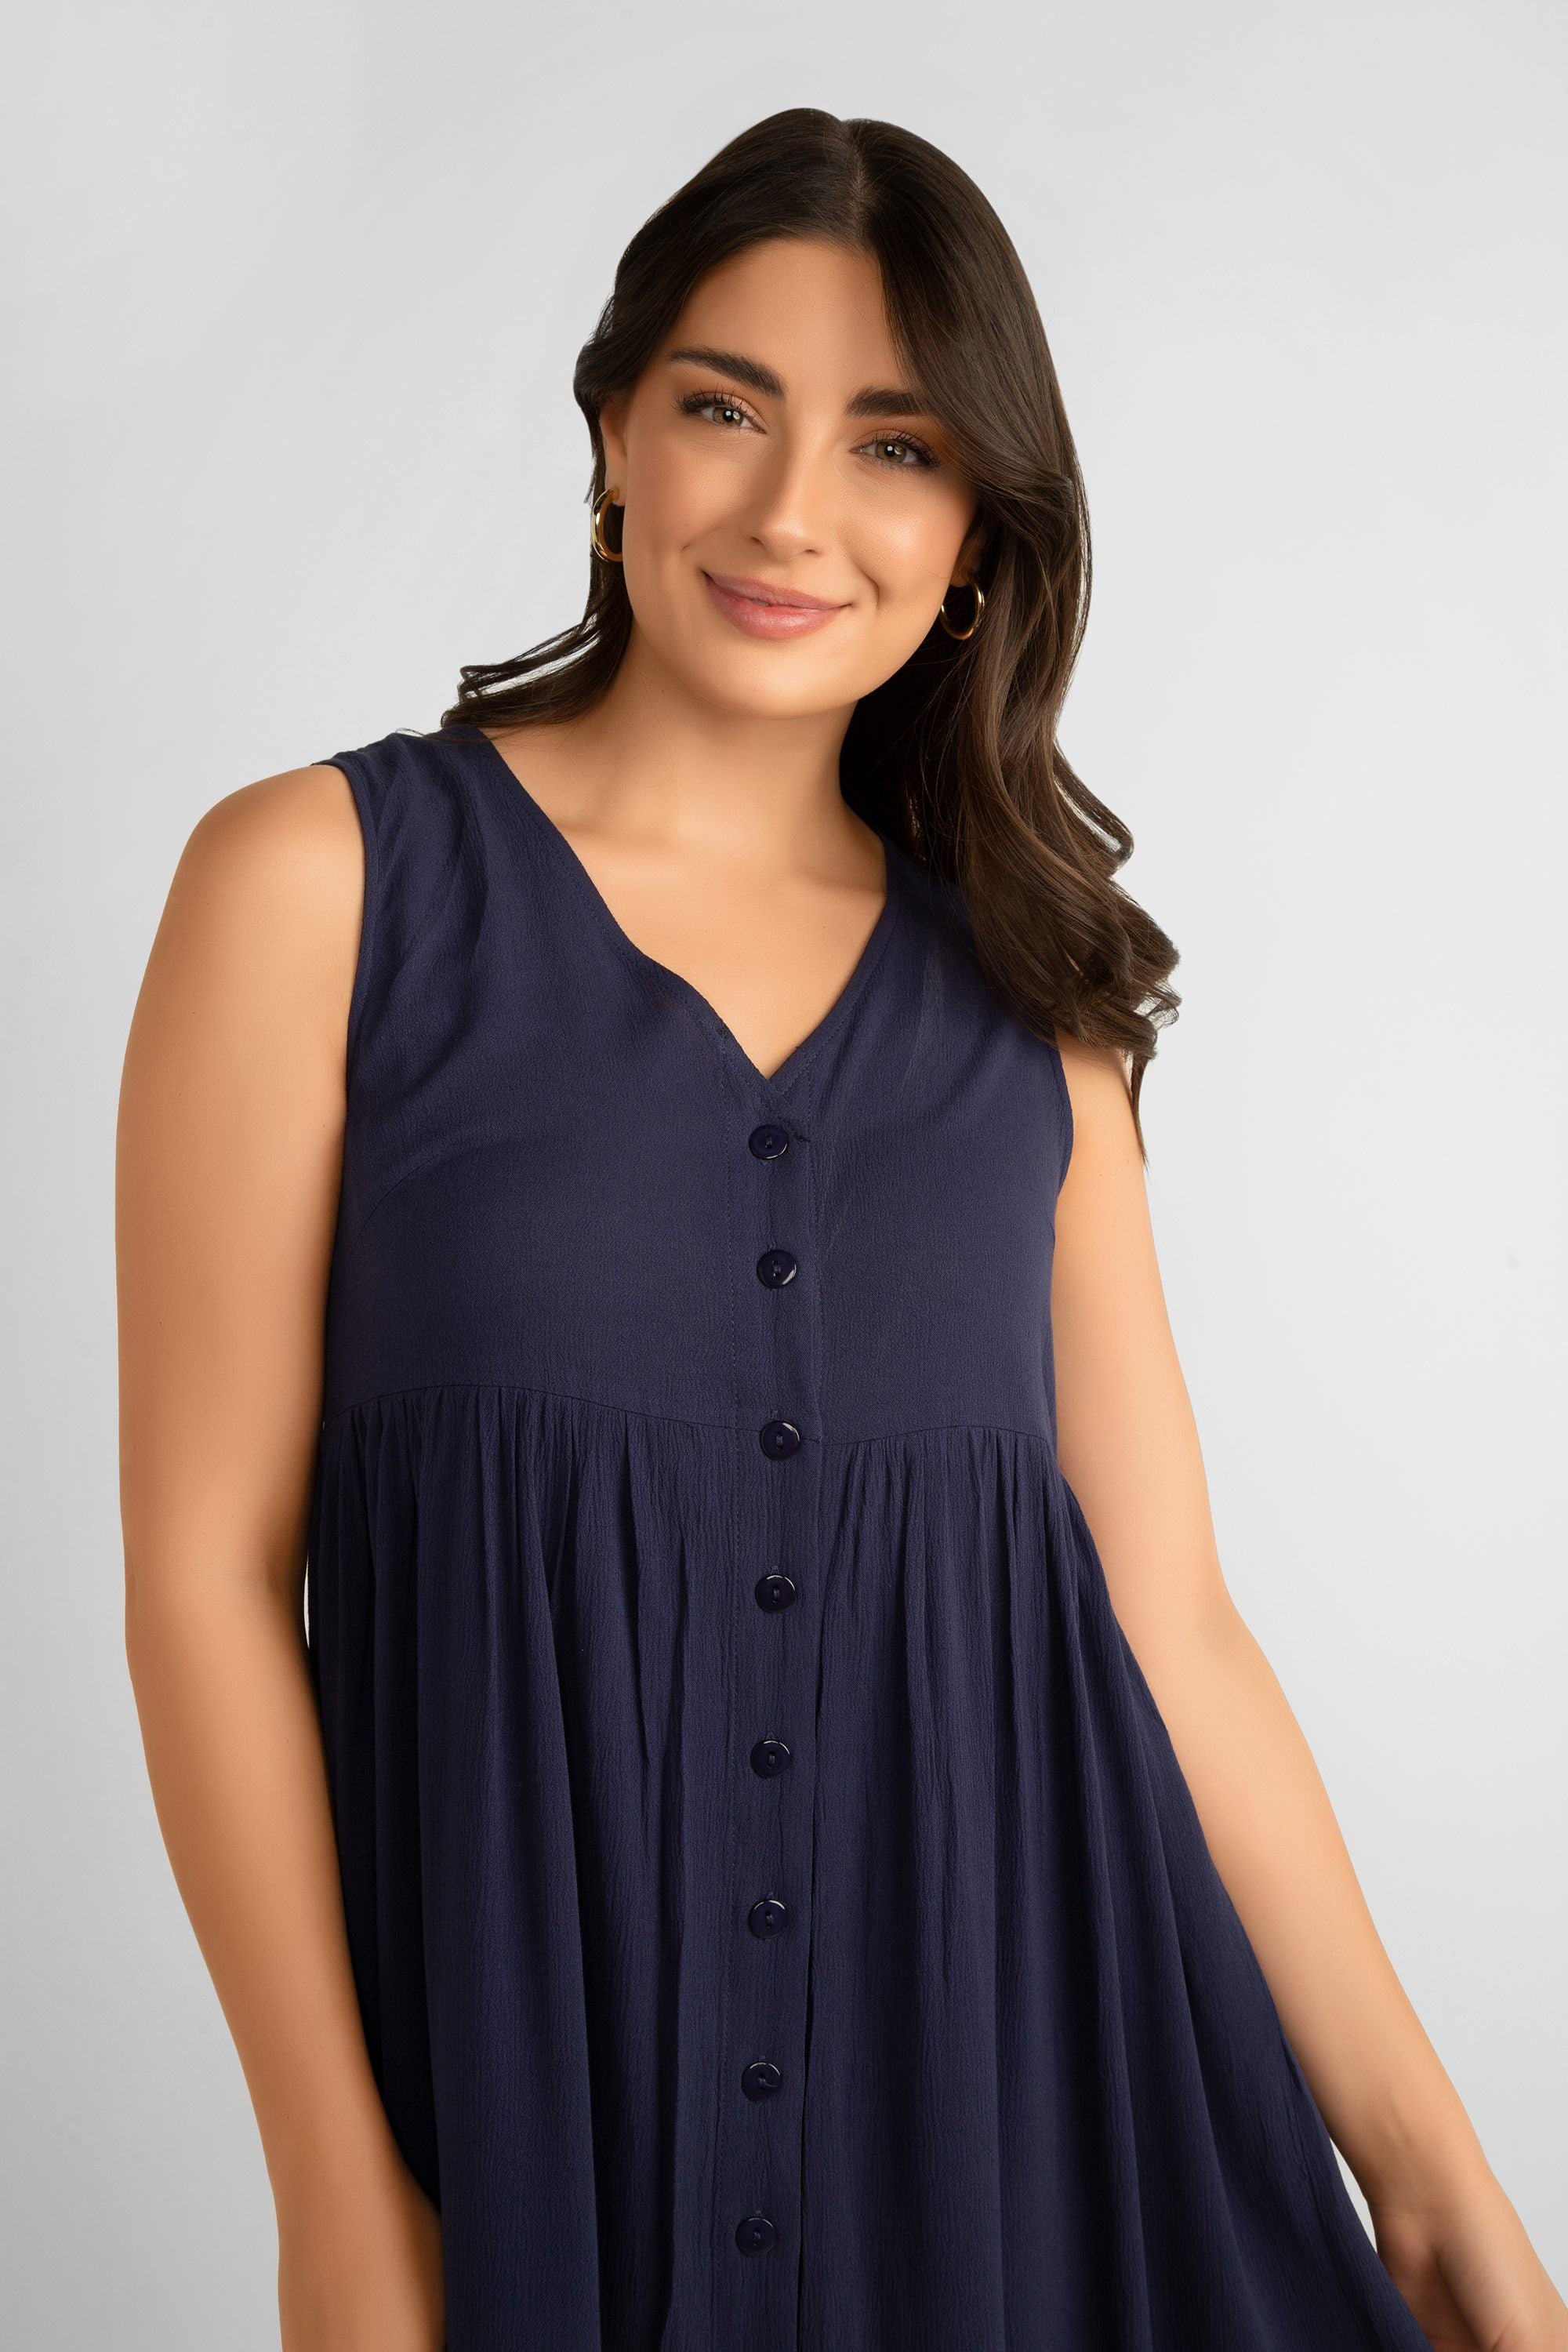 Pink Martini (DR-230524) Pheobe Dress - Button Front Sleeveless Above the Knee Dress in Navy